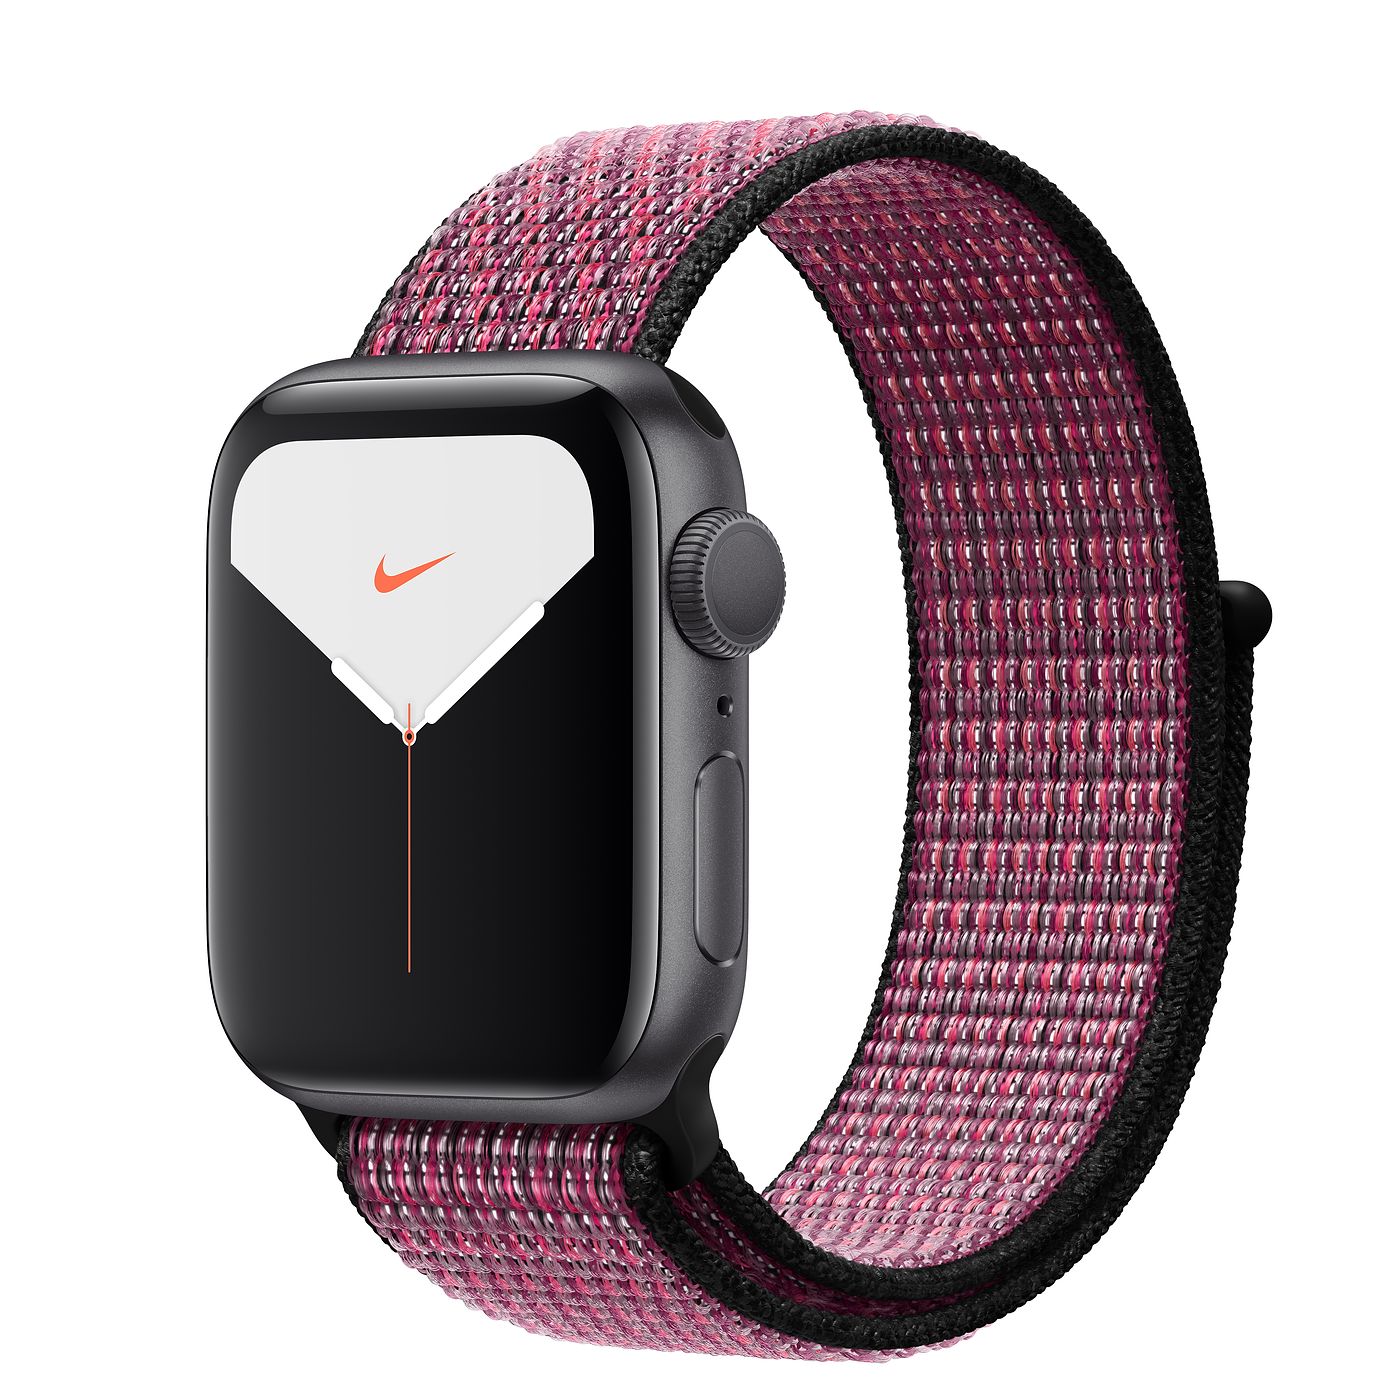 Apple Watch Nike Series 5 GPS 44mm Space Gray Aluminum with Pink